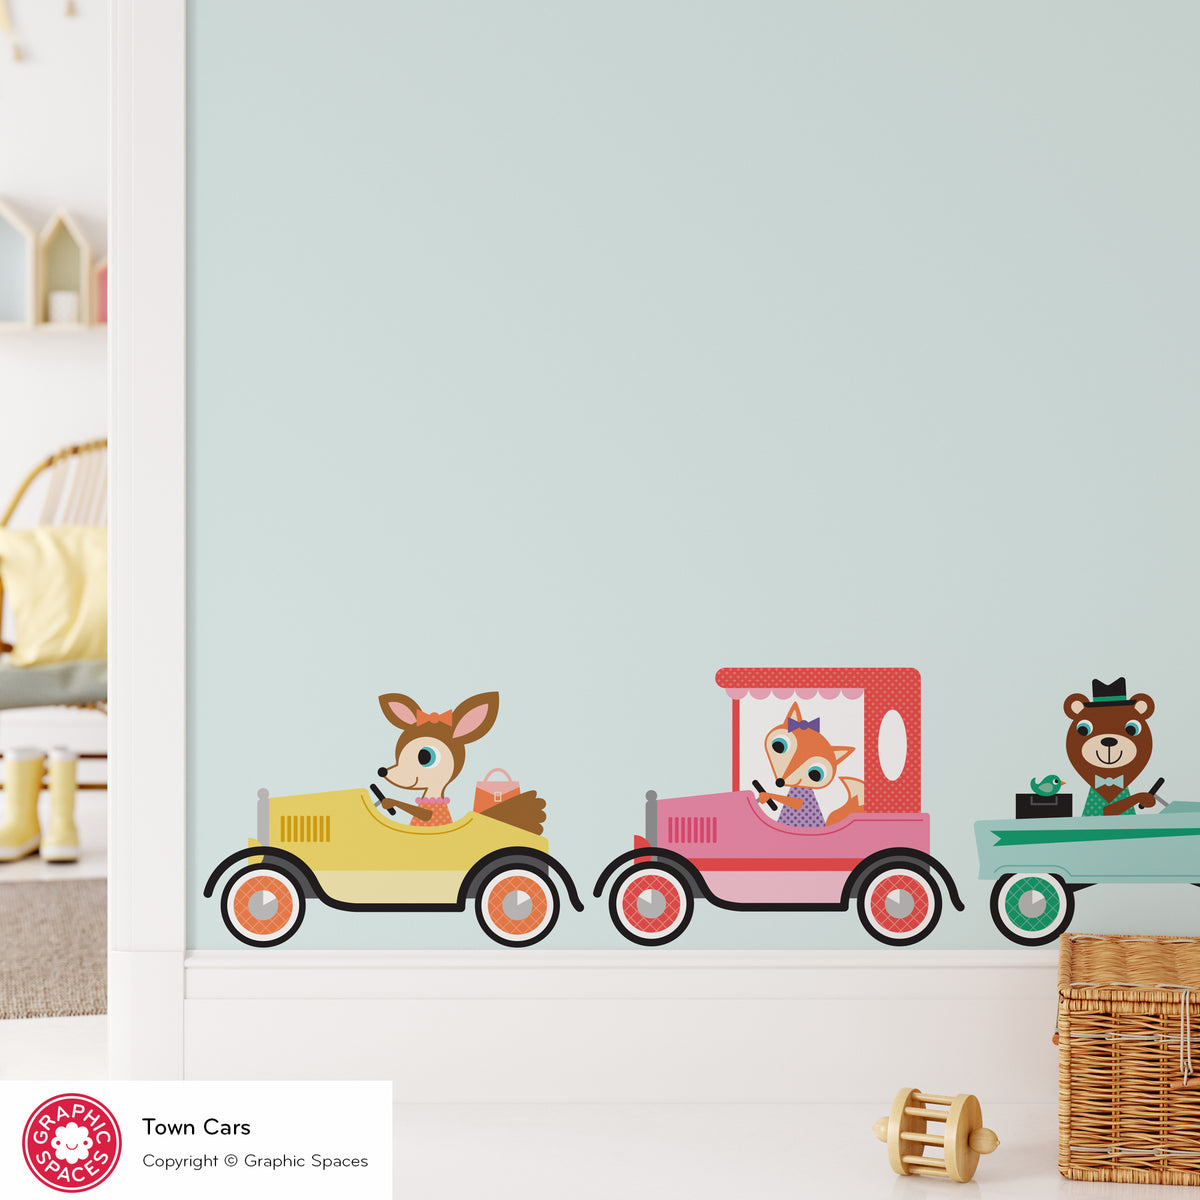 Animals in Cars Fabric Wall Decals - Pack of 10